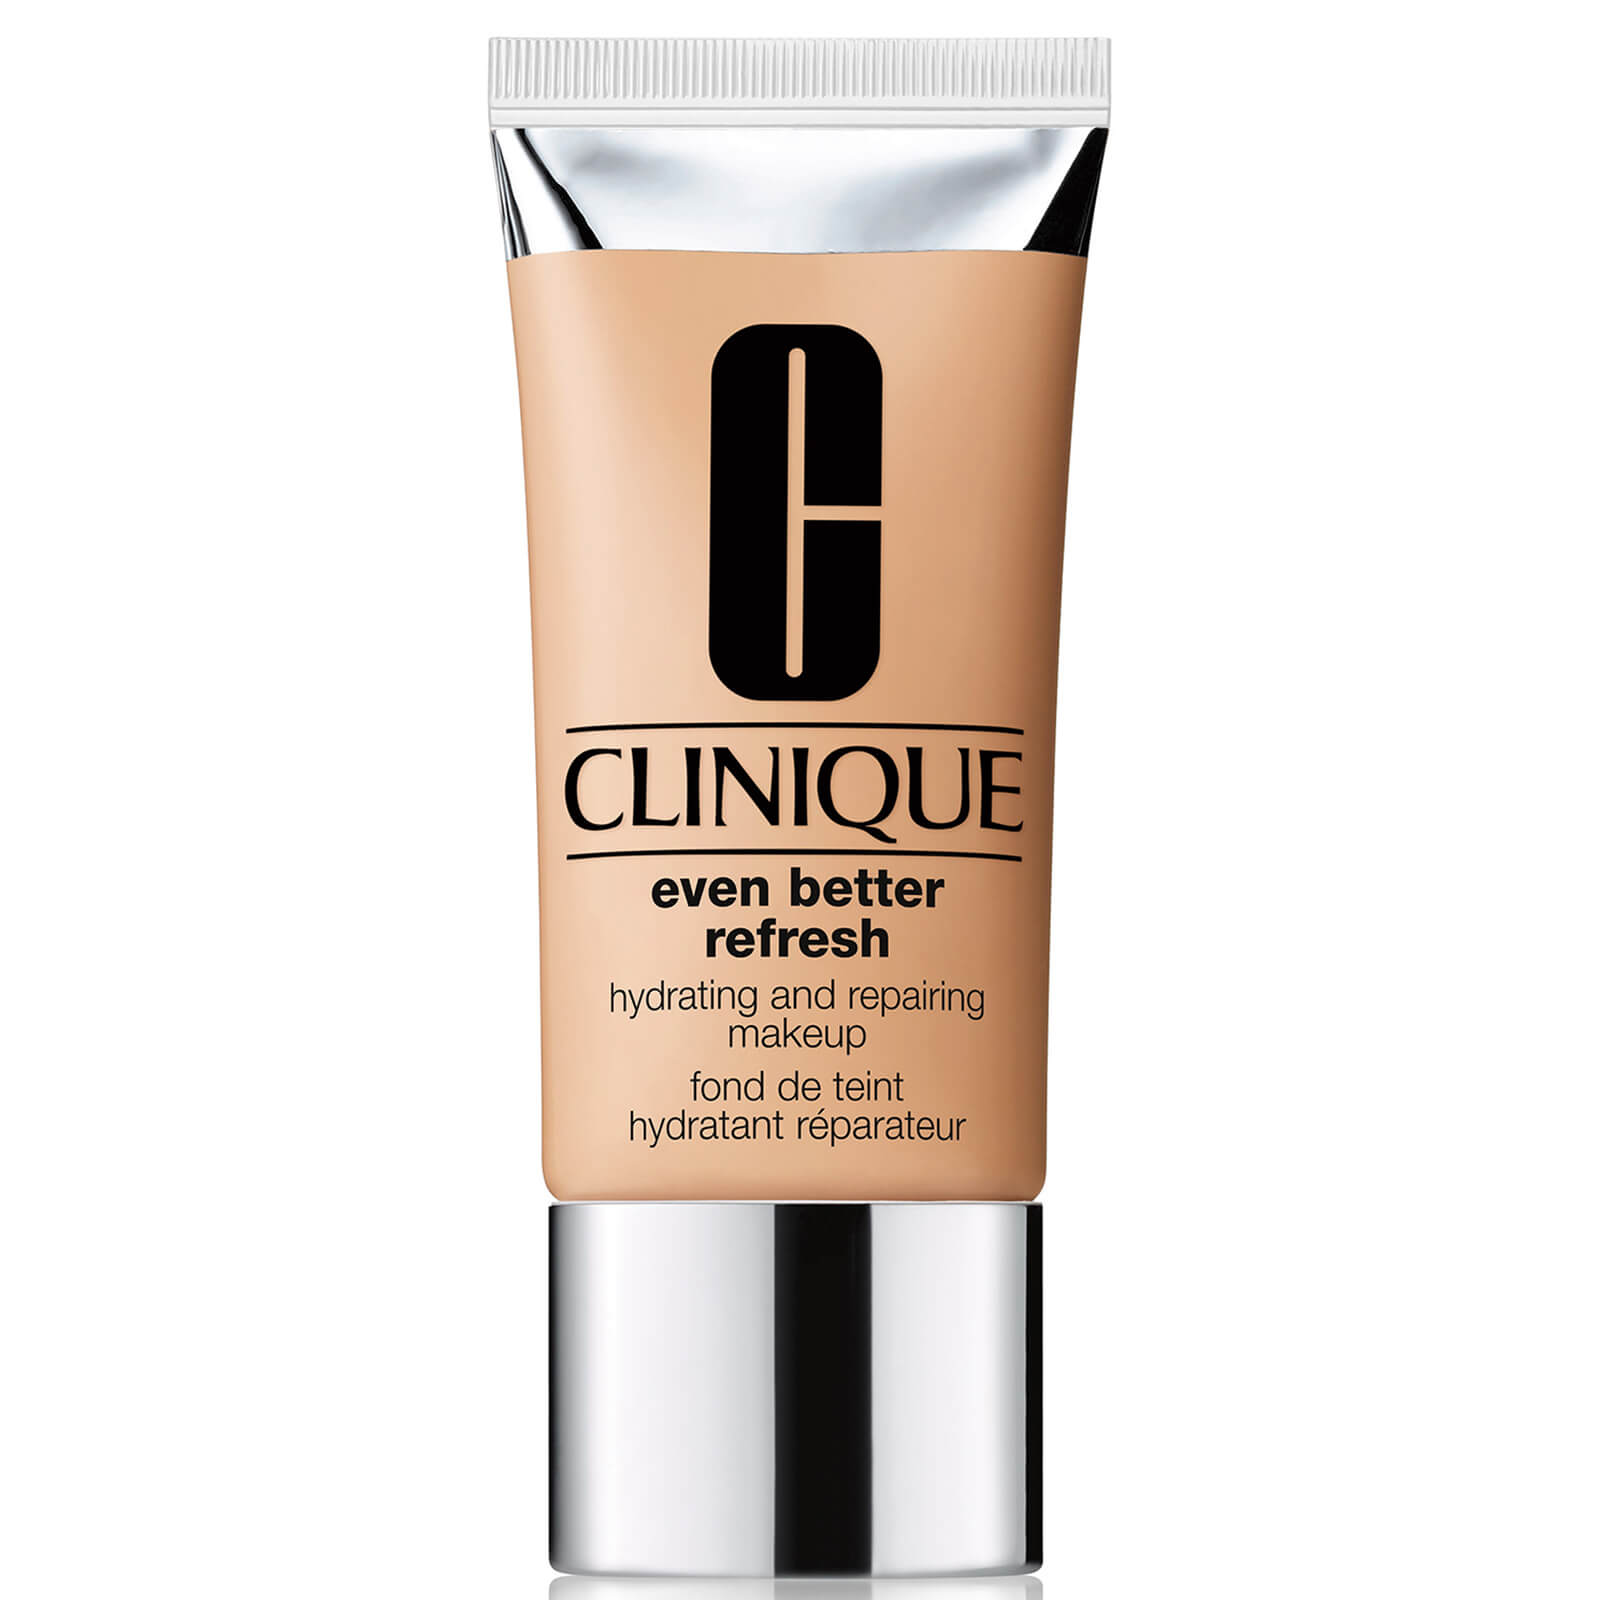 Clinique Even Better Refresh Hydrating and Repairing Makeup 30ml (Various Shades) - CN 62 Porcelain Beige